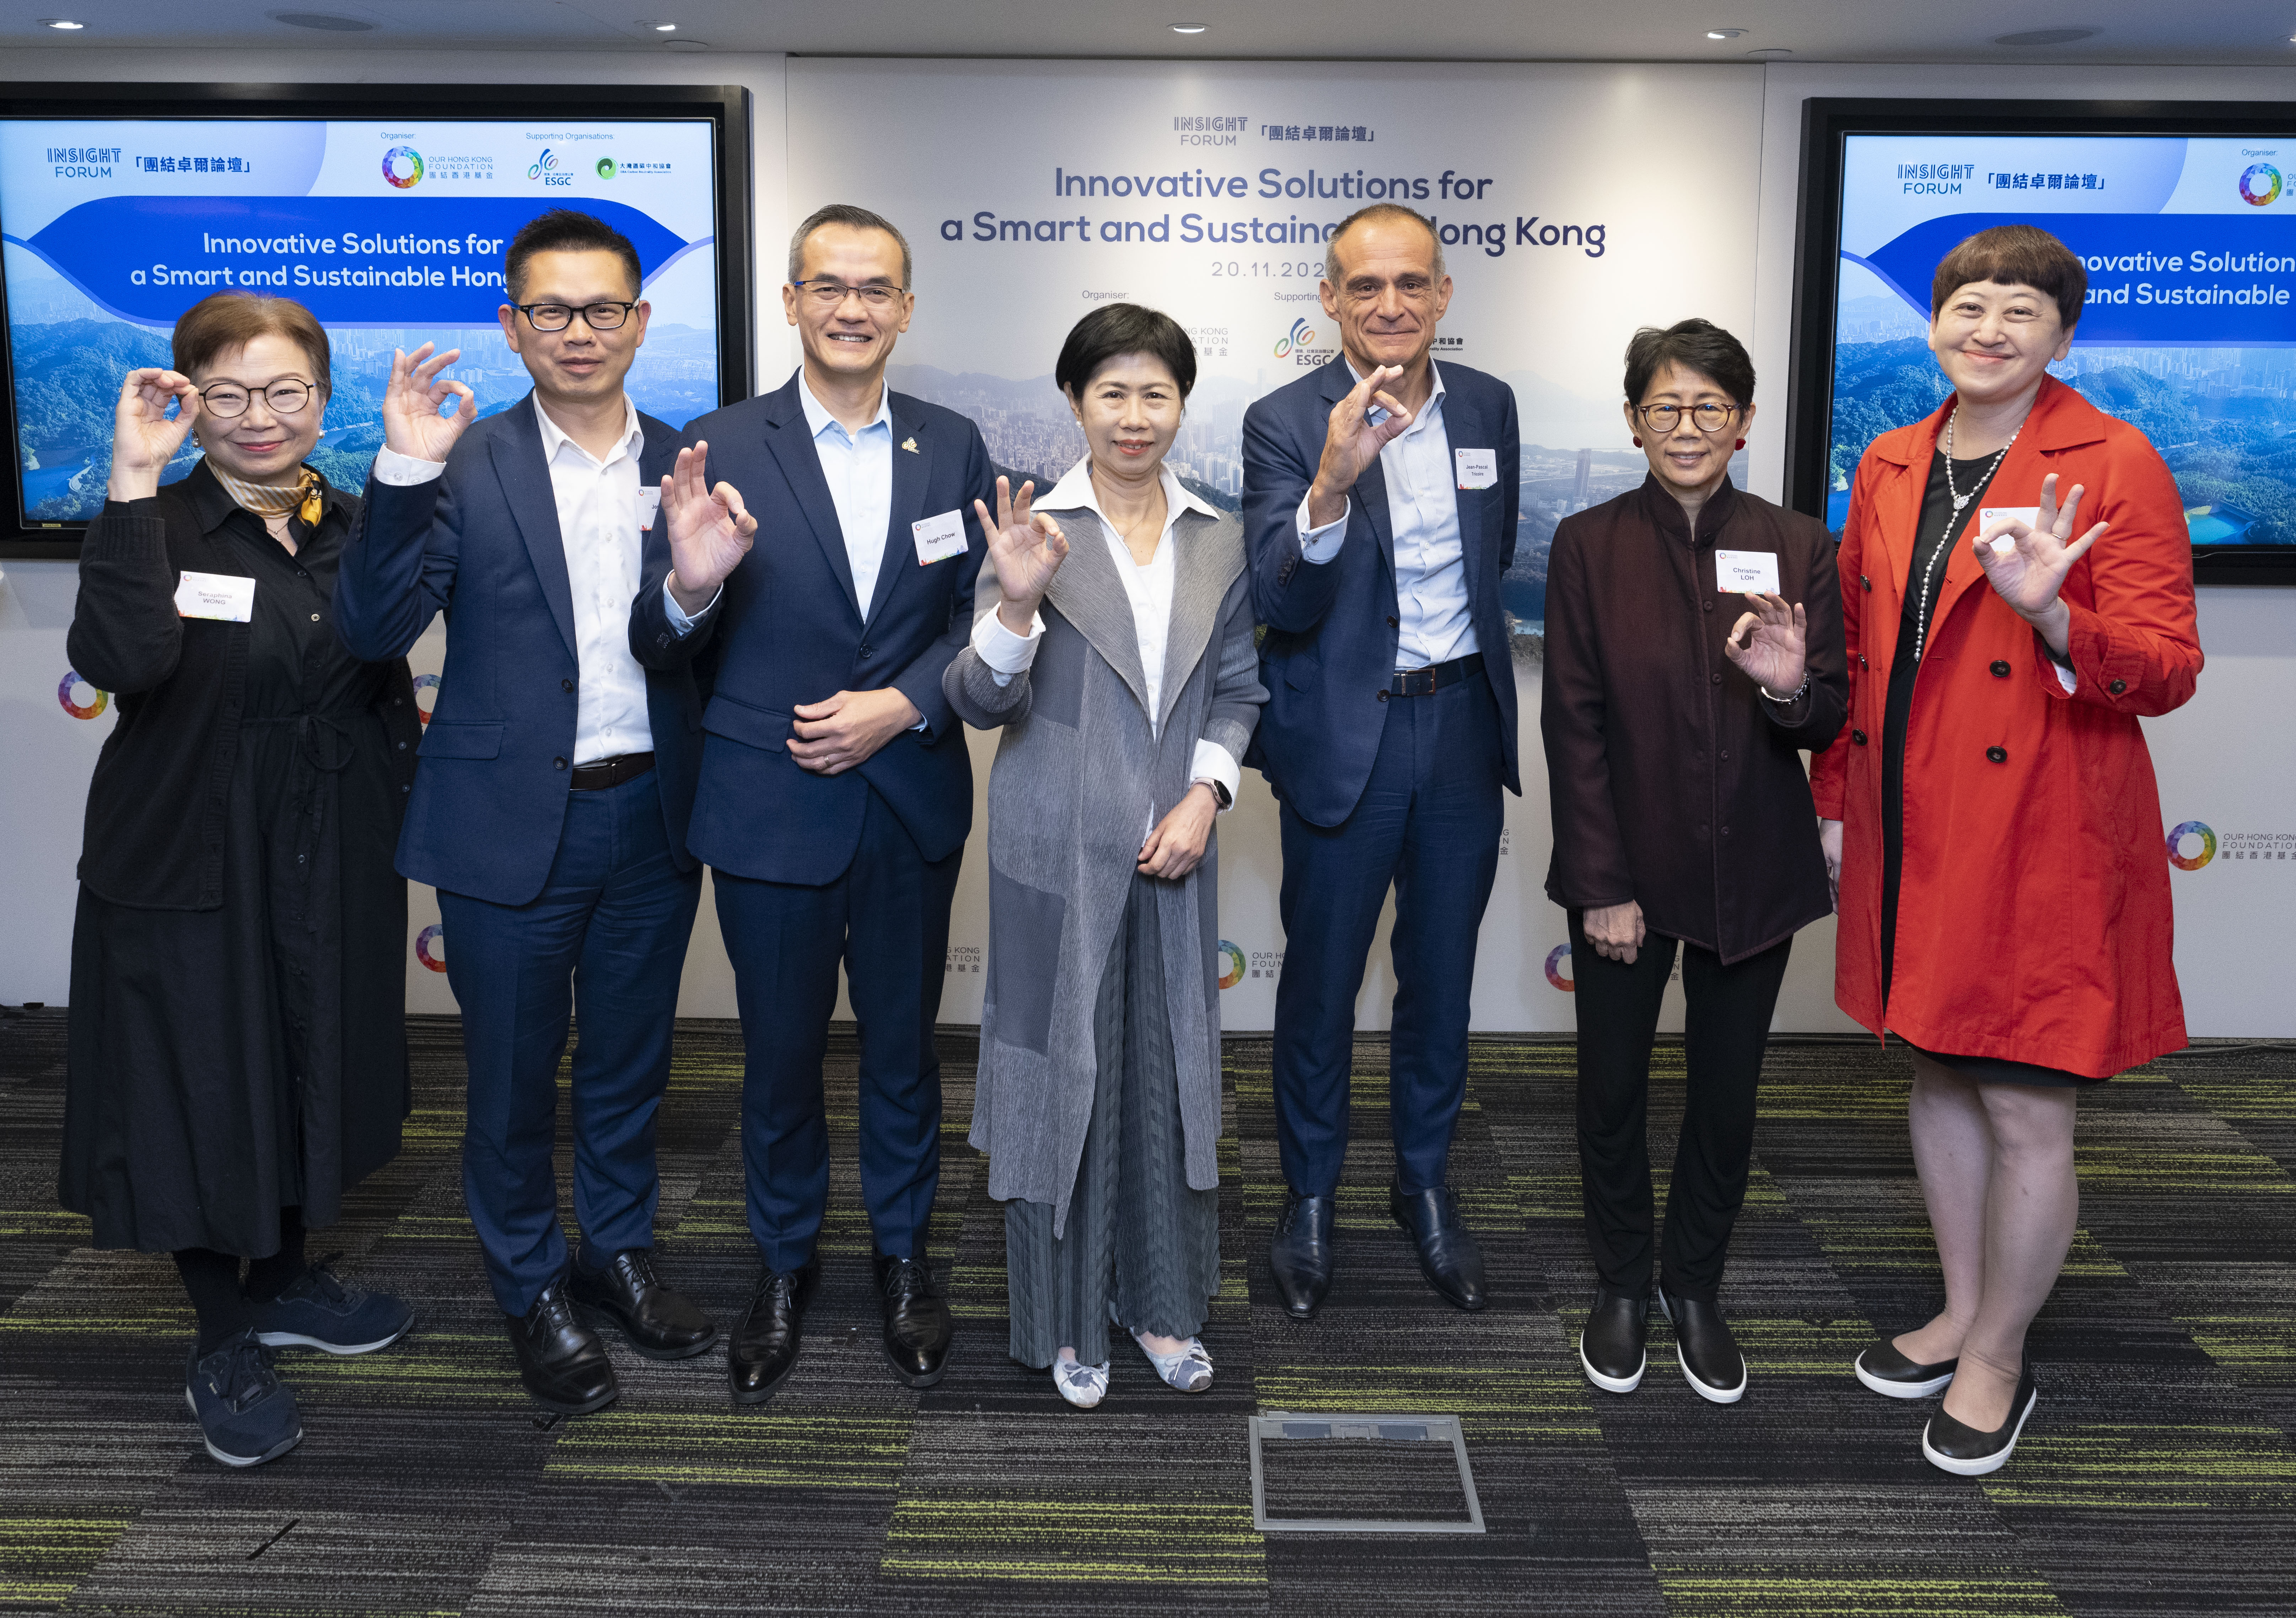 Innovative Solutions for a Smart and Sustainable Hong Kong